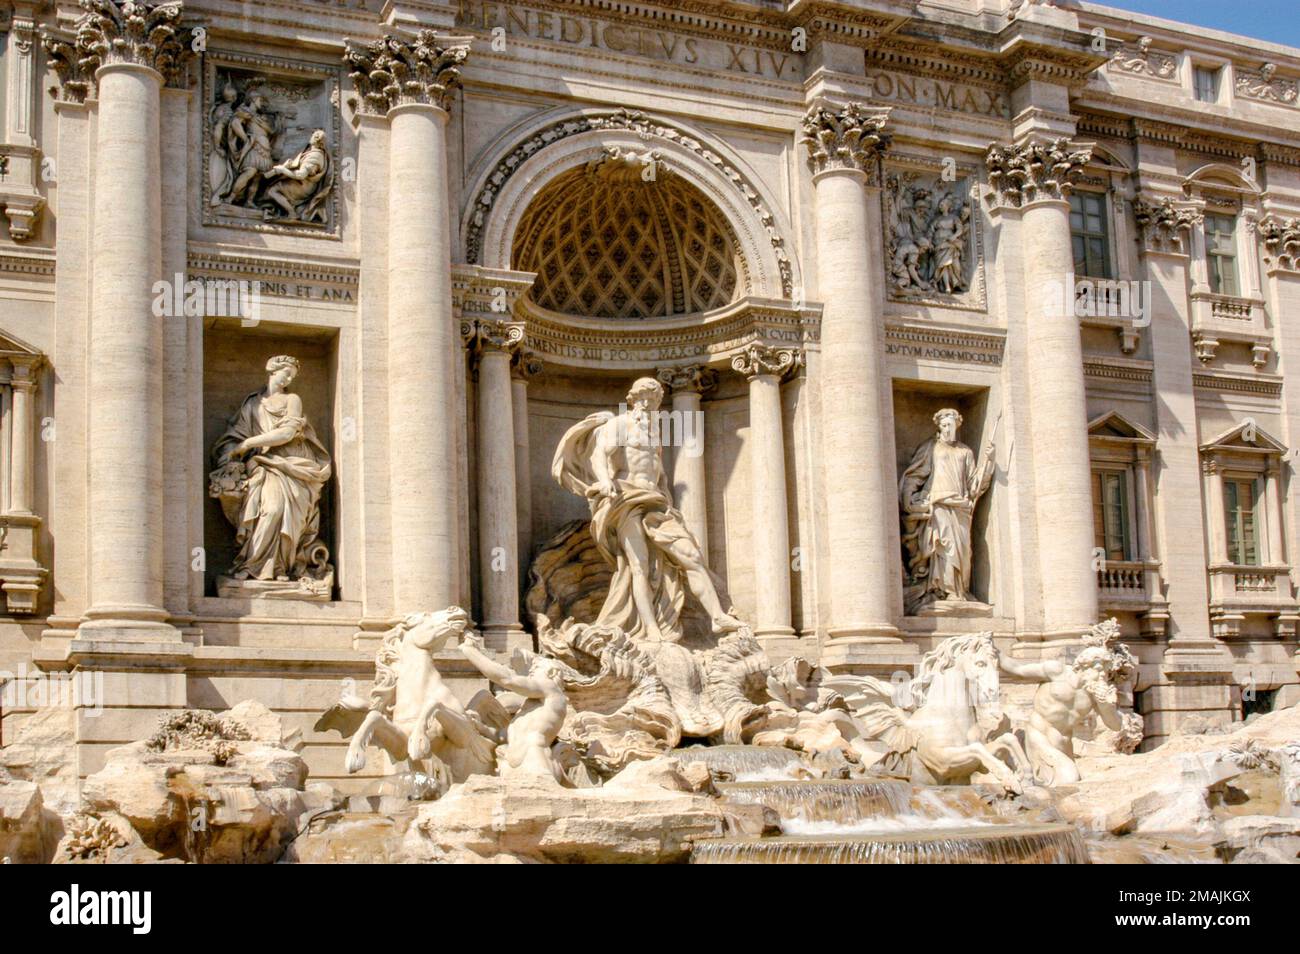 The Trevi Fountain in Rome on a bright sunny day made of travertine stone. Stock Photo